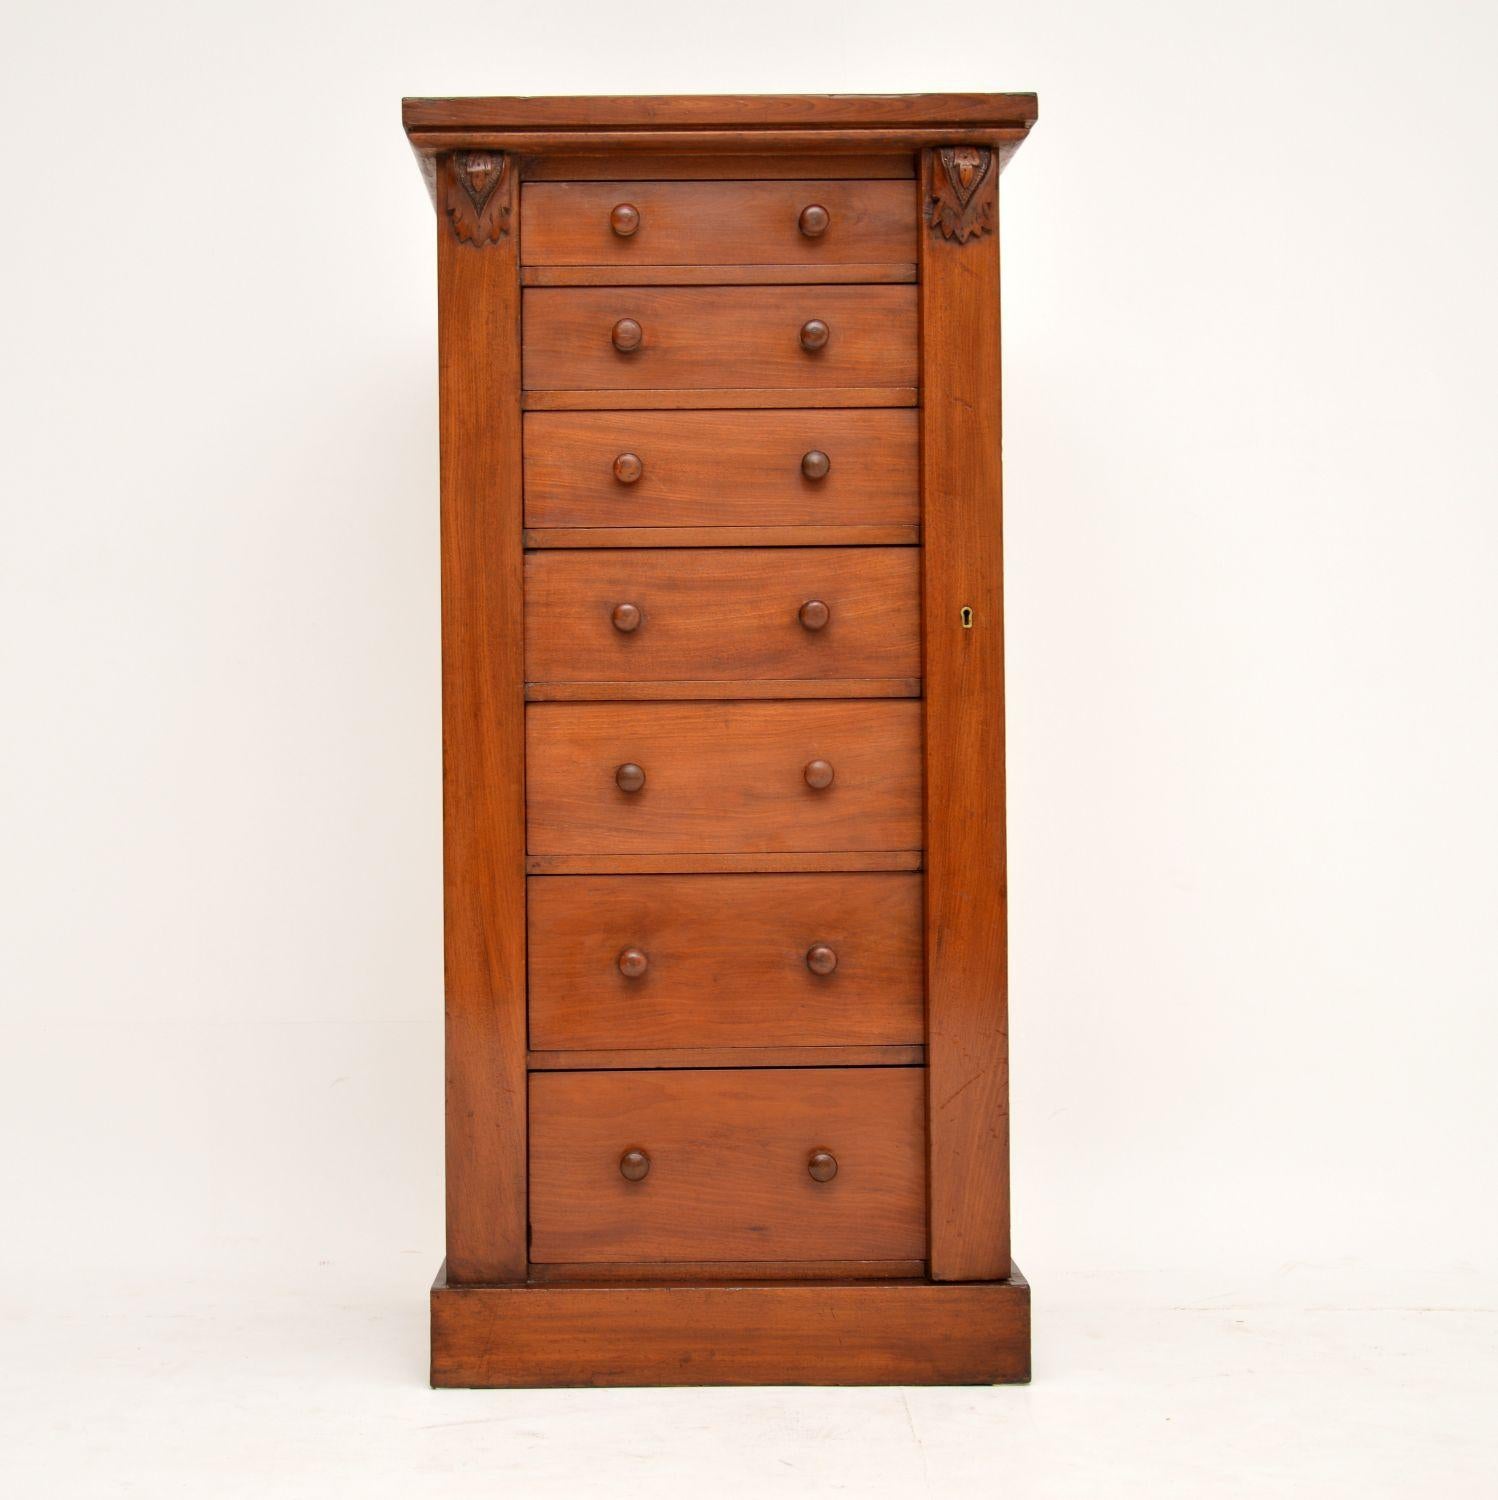 Antique Victorian mahogany Wellington chest of drawers in excellent condition and dating from the 1870s-1980s period. Wellington chests always have seven drawers and a hinged bar on one side that locks them all into place. The drawers are all